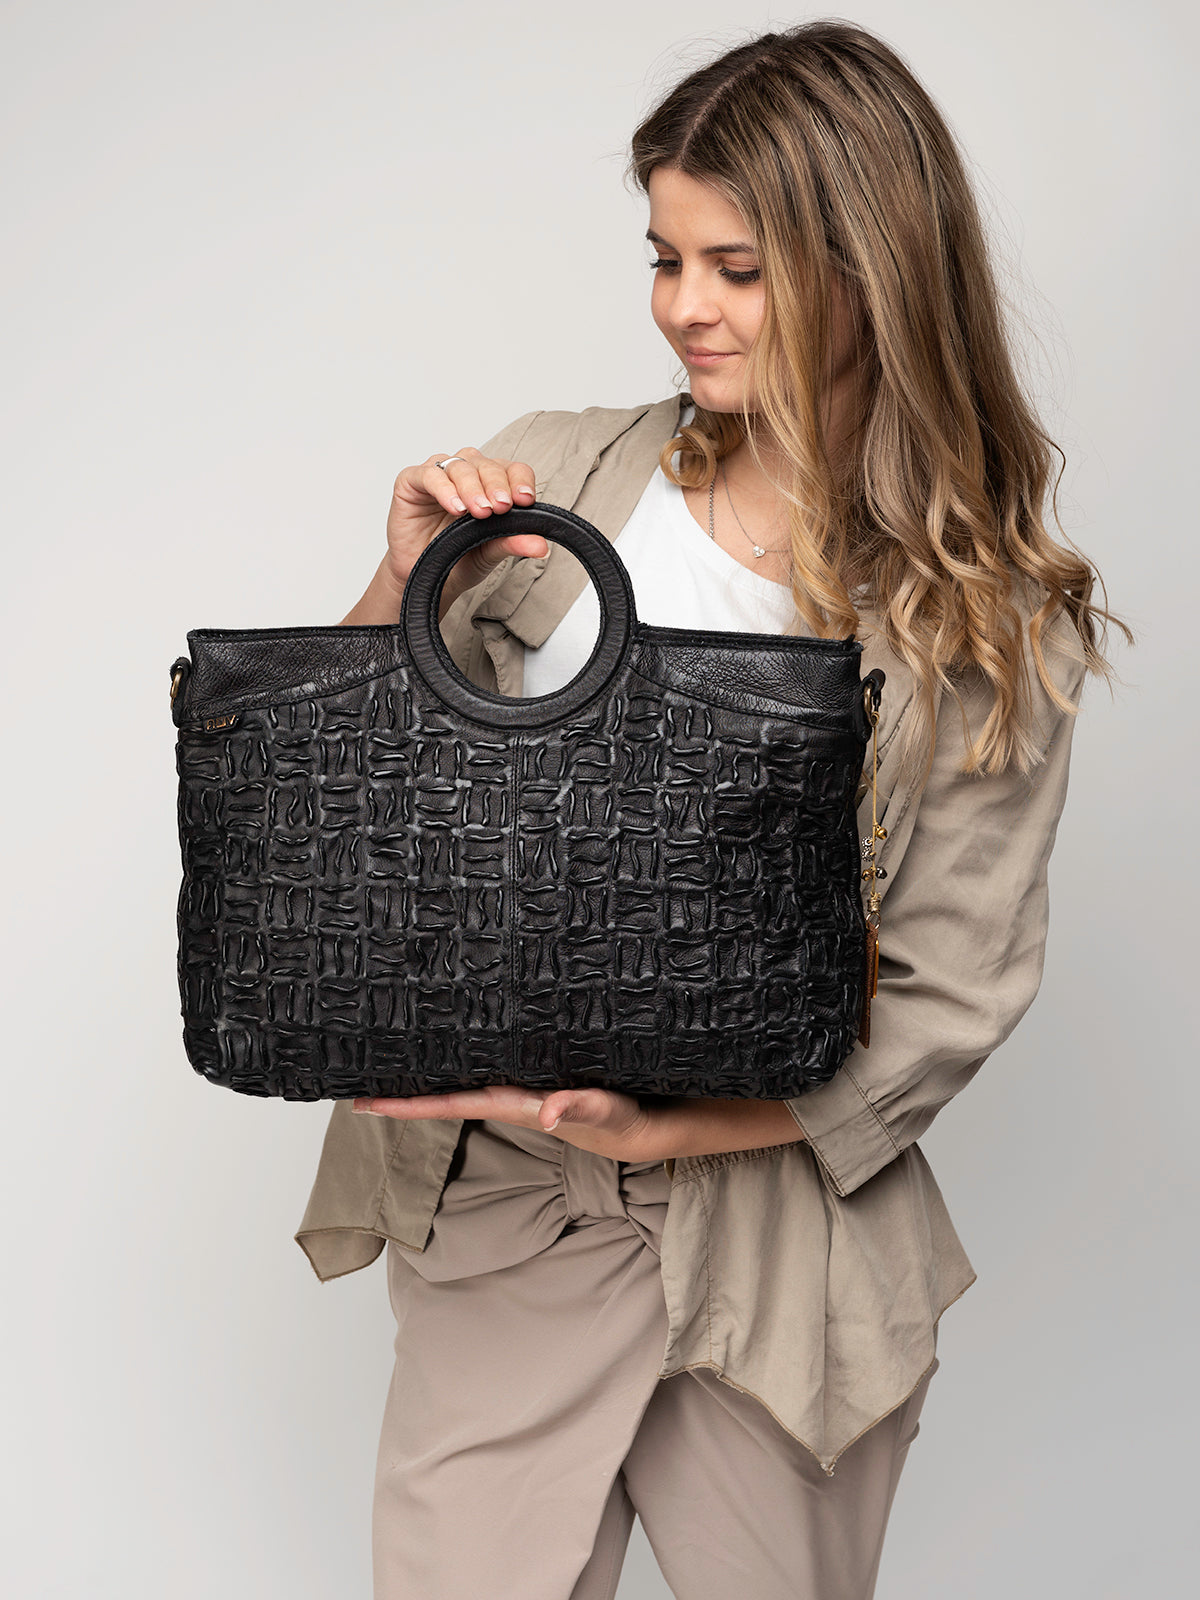 ESTHER: Black leather working bag by Art N Vitage